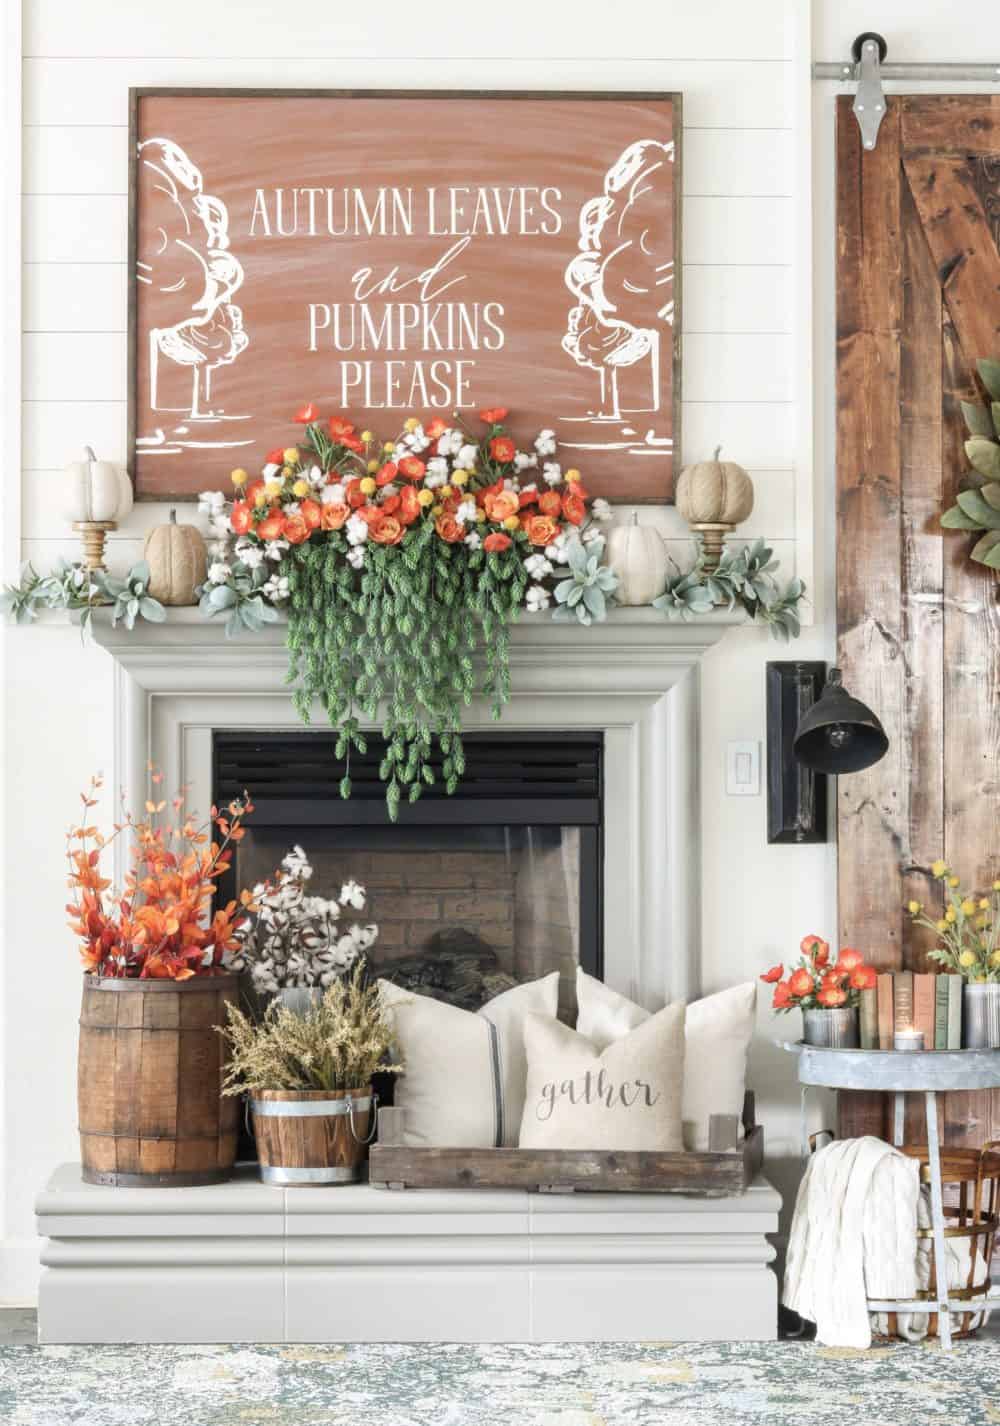 This sign makes this fall mantel! It is amazing!